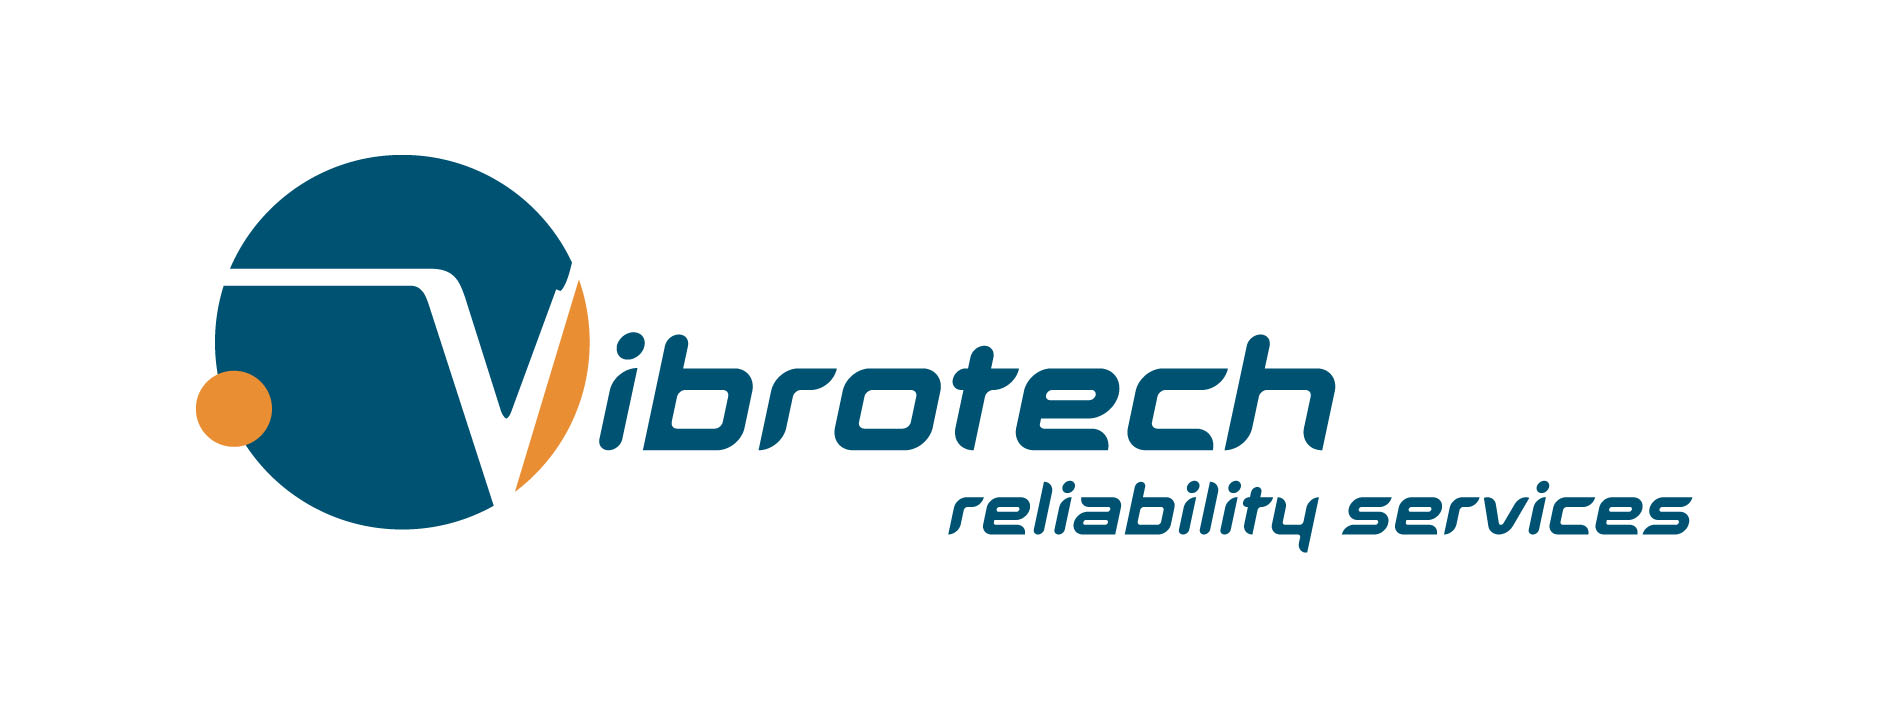 Vibrotech Reliability Services Ltd - Condition Monitoring Services